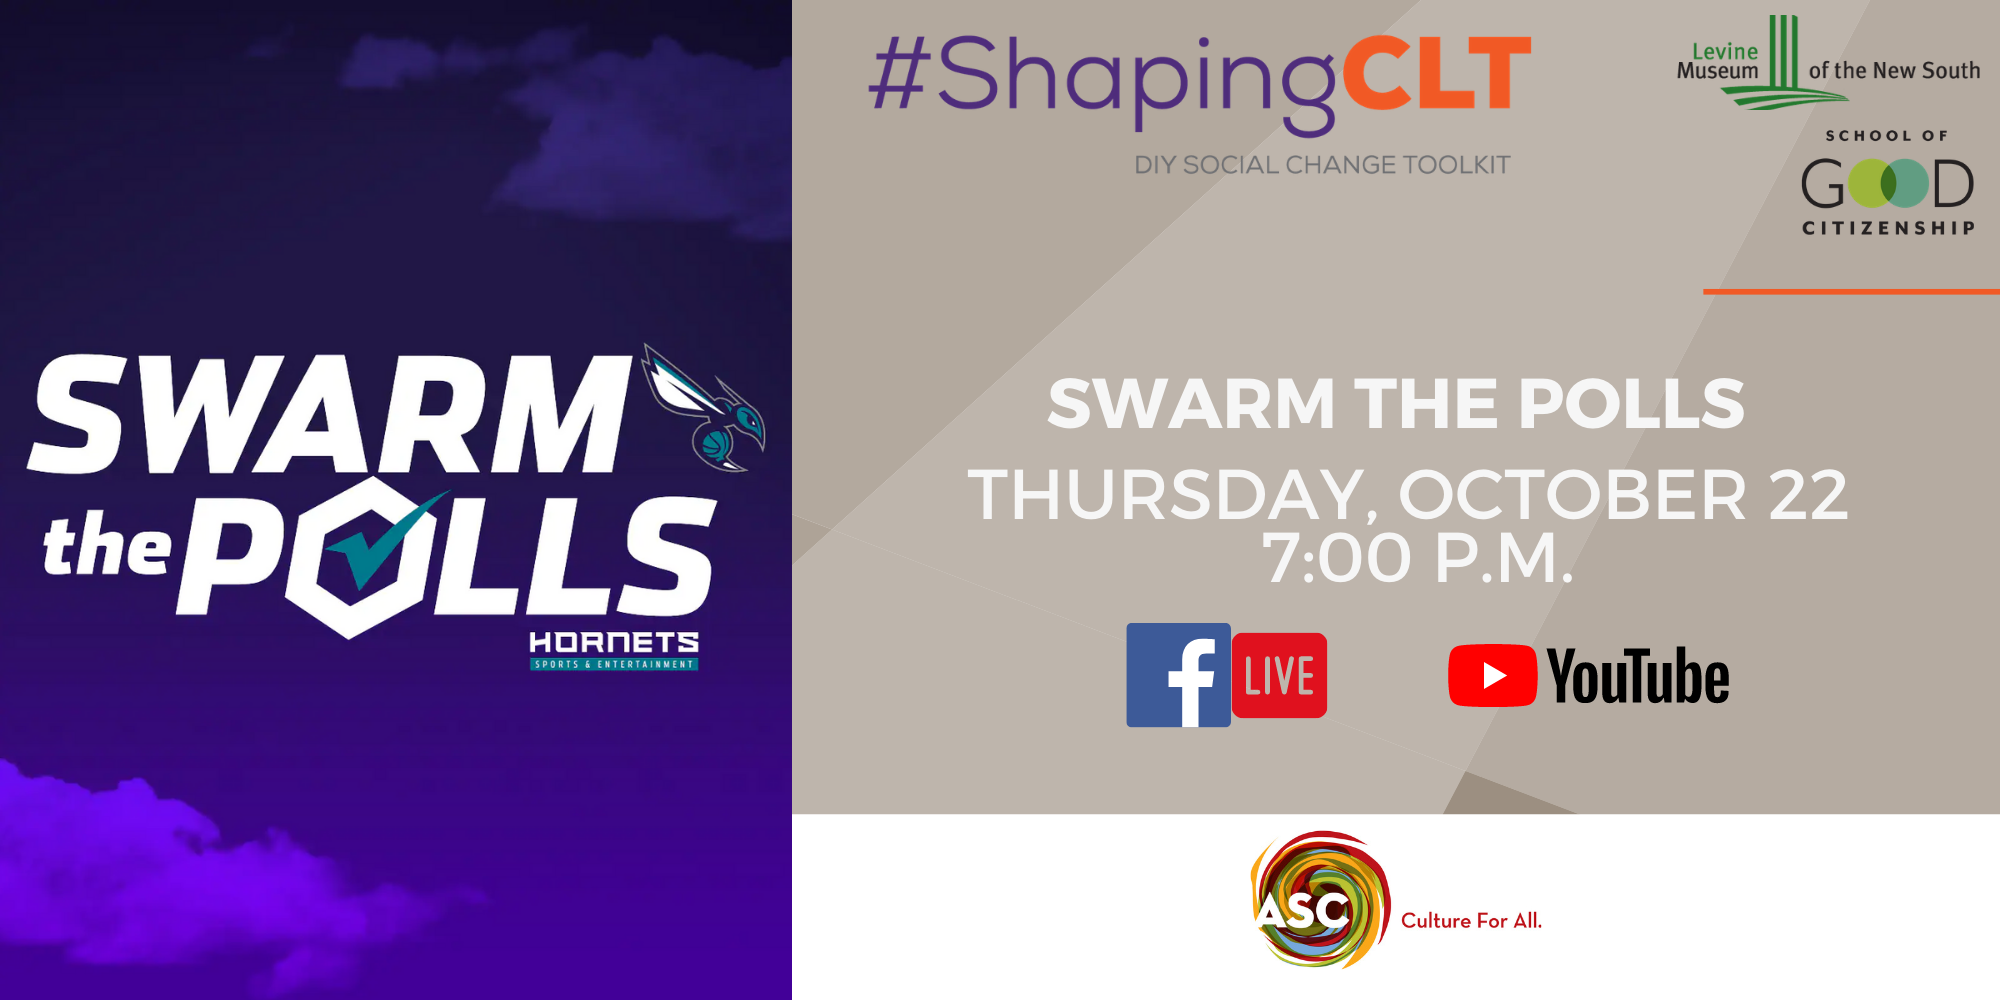 Levine Museum of the New South #ShapingCLT: Swarm The Polls Event Image